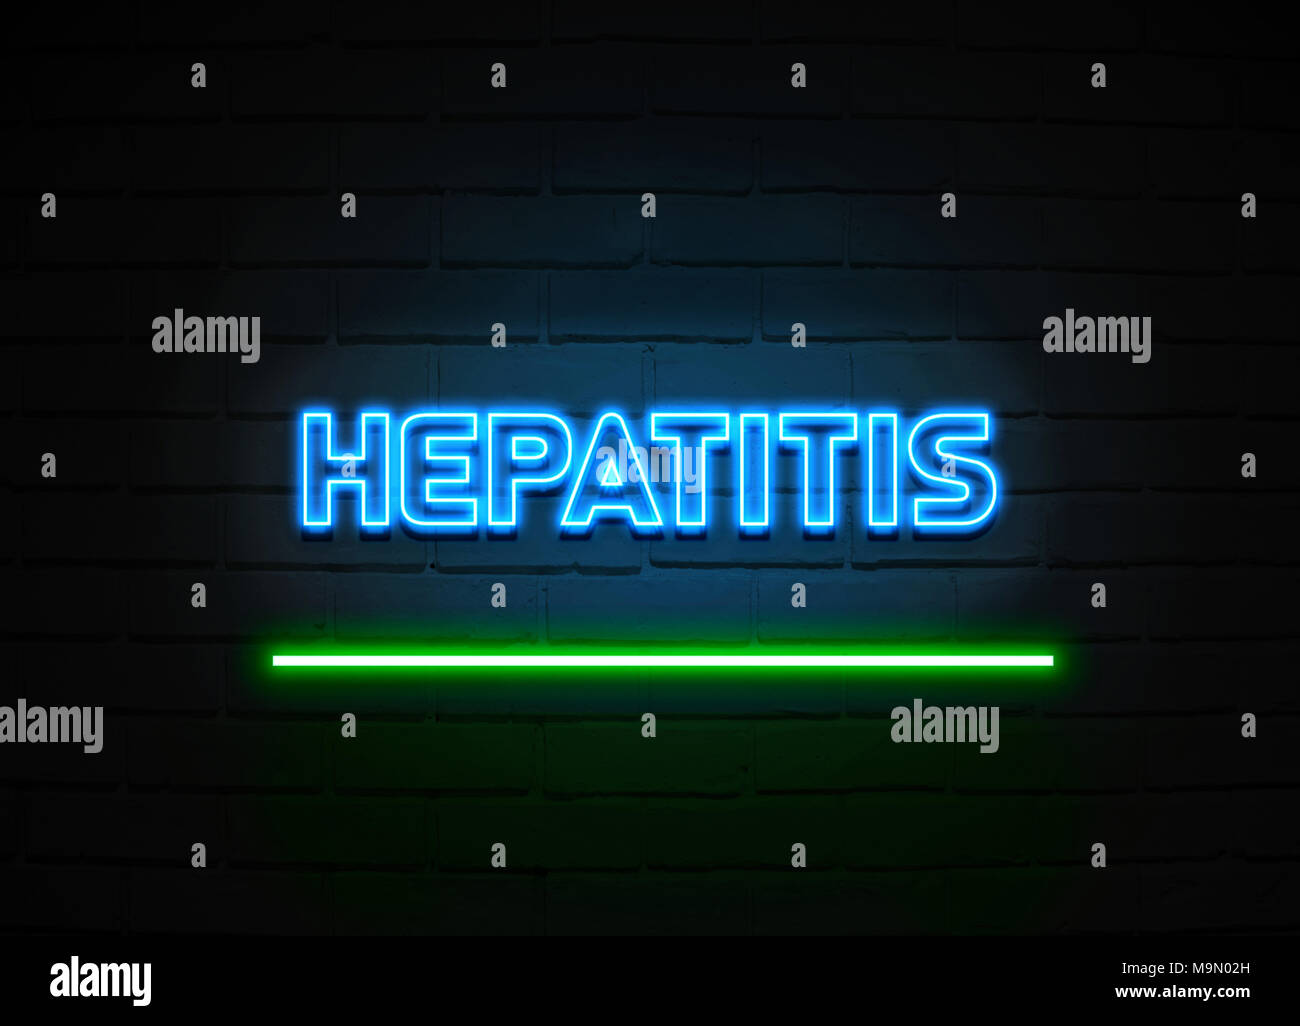 Hepatitis neon sign - Glowing Neon Sign on brickwall wall - 3D rendered royalty free stock illustration. Stock Photo